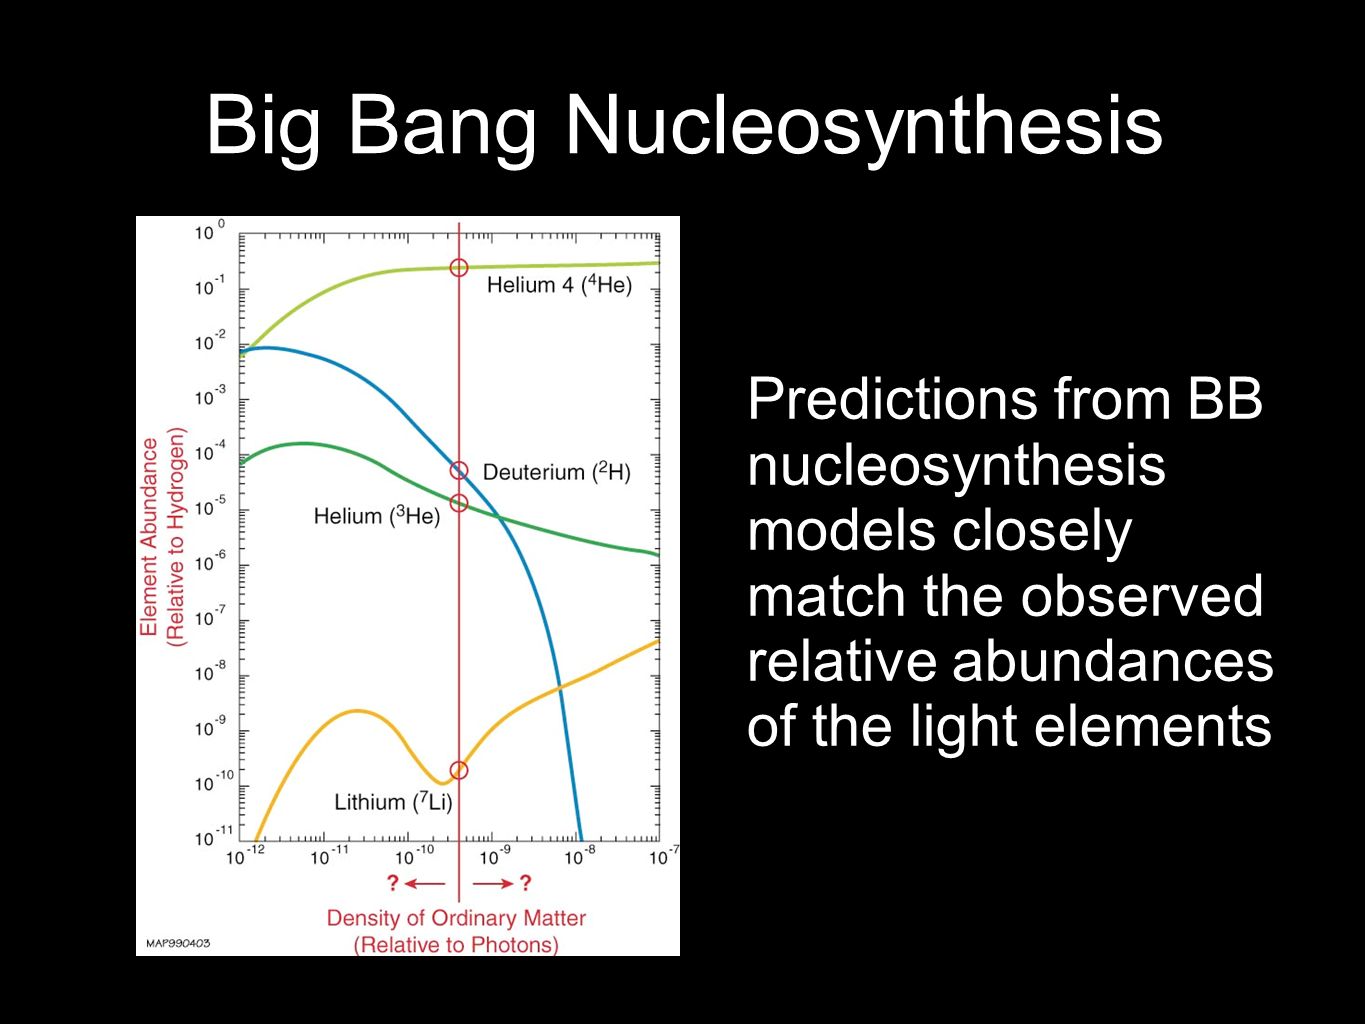 Big Bang Nucleosynthesis Predictions from BB nucleosynthesis models closely match the observed relative abundances of the light elements